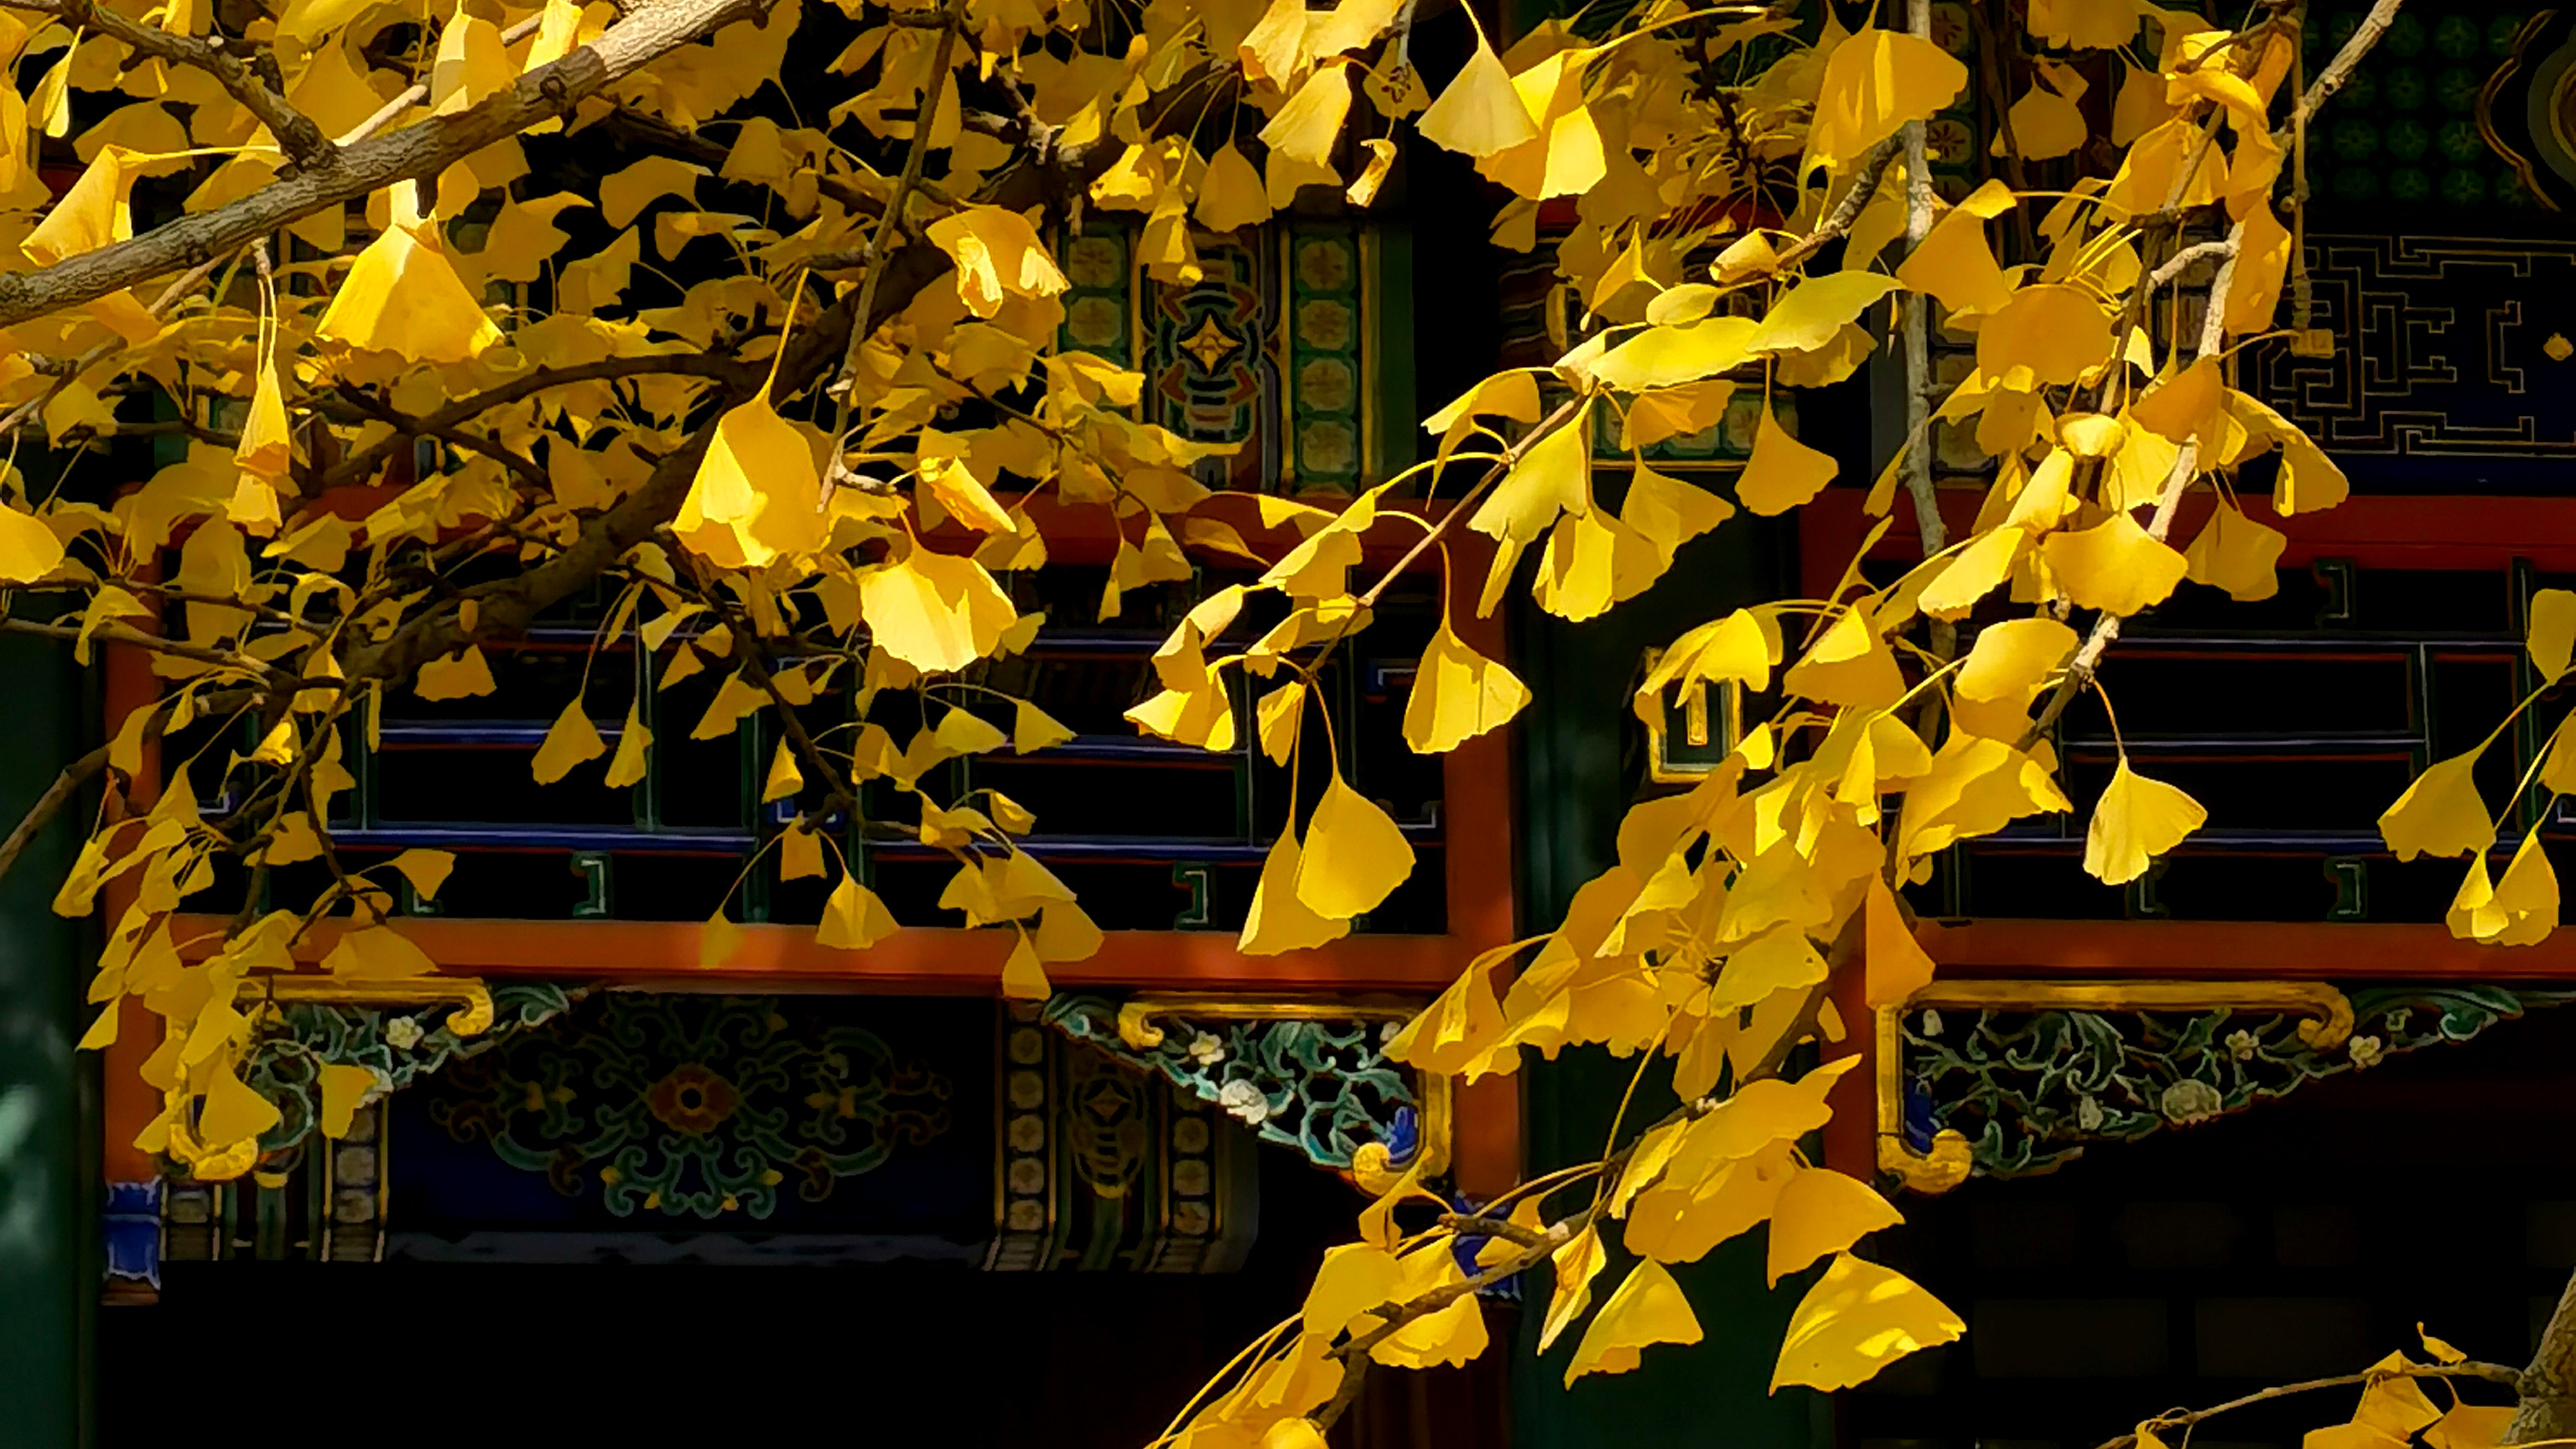 The ginkgoes in autumn